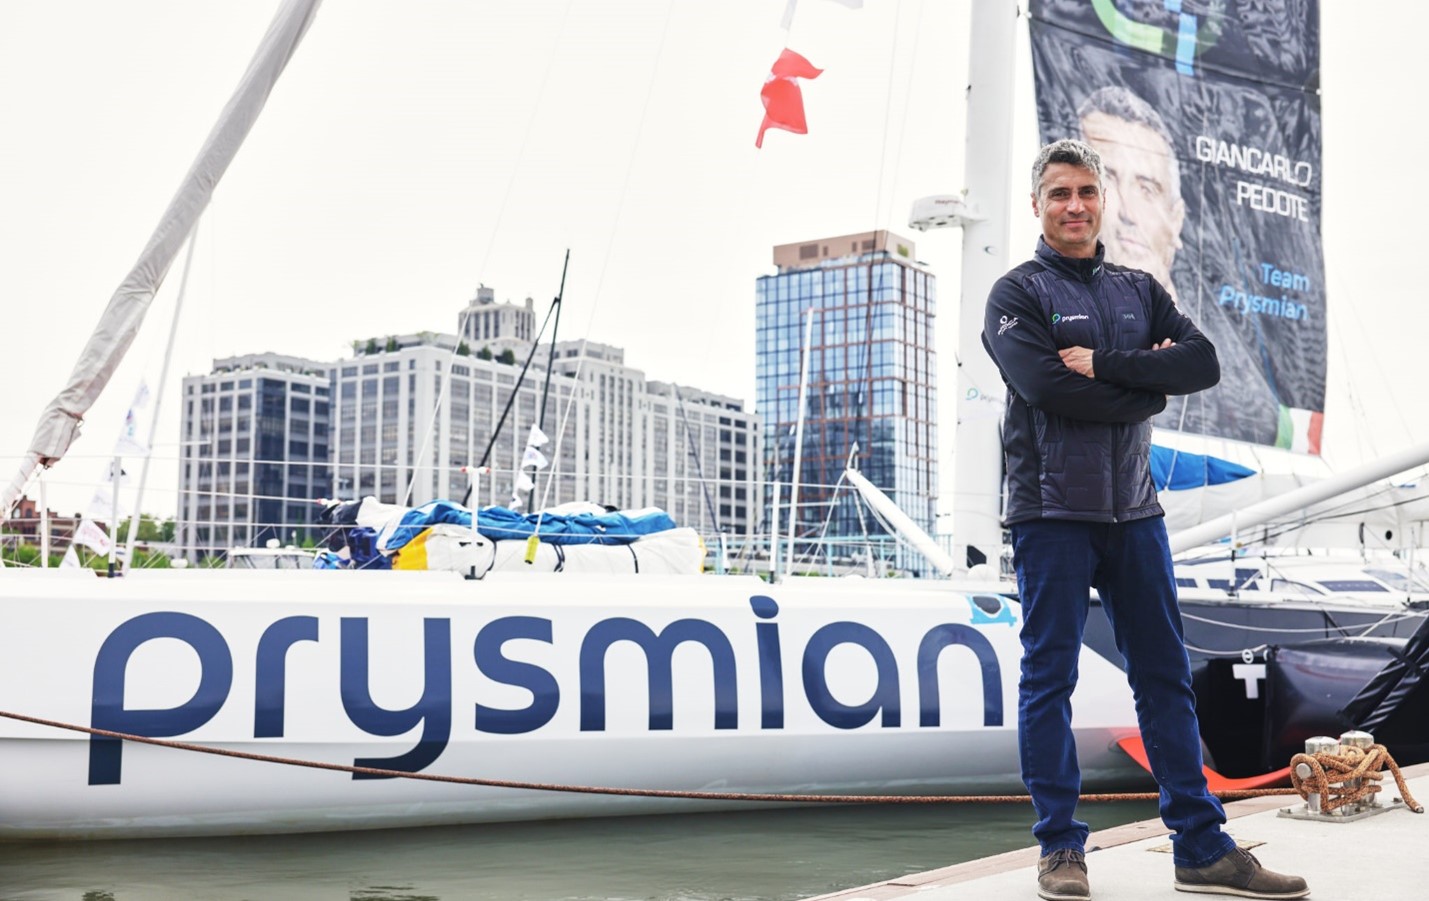 Giancarlo Pedote, Prysmian skipper, pictured with his yacht in NYC.